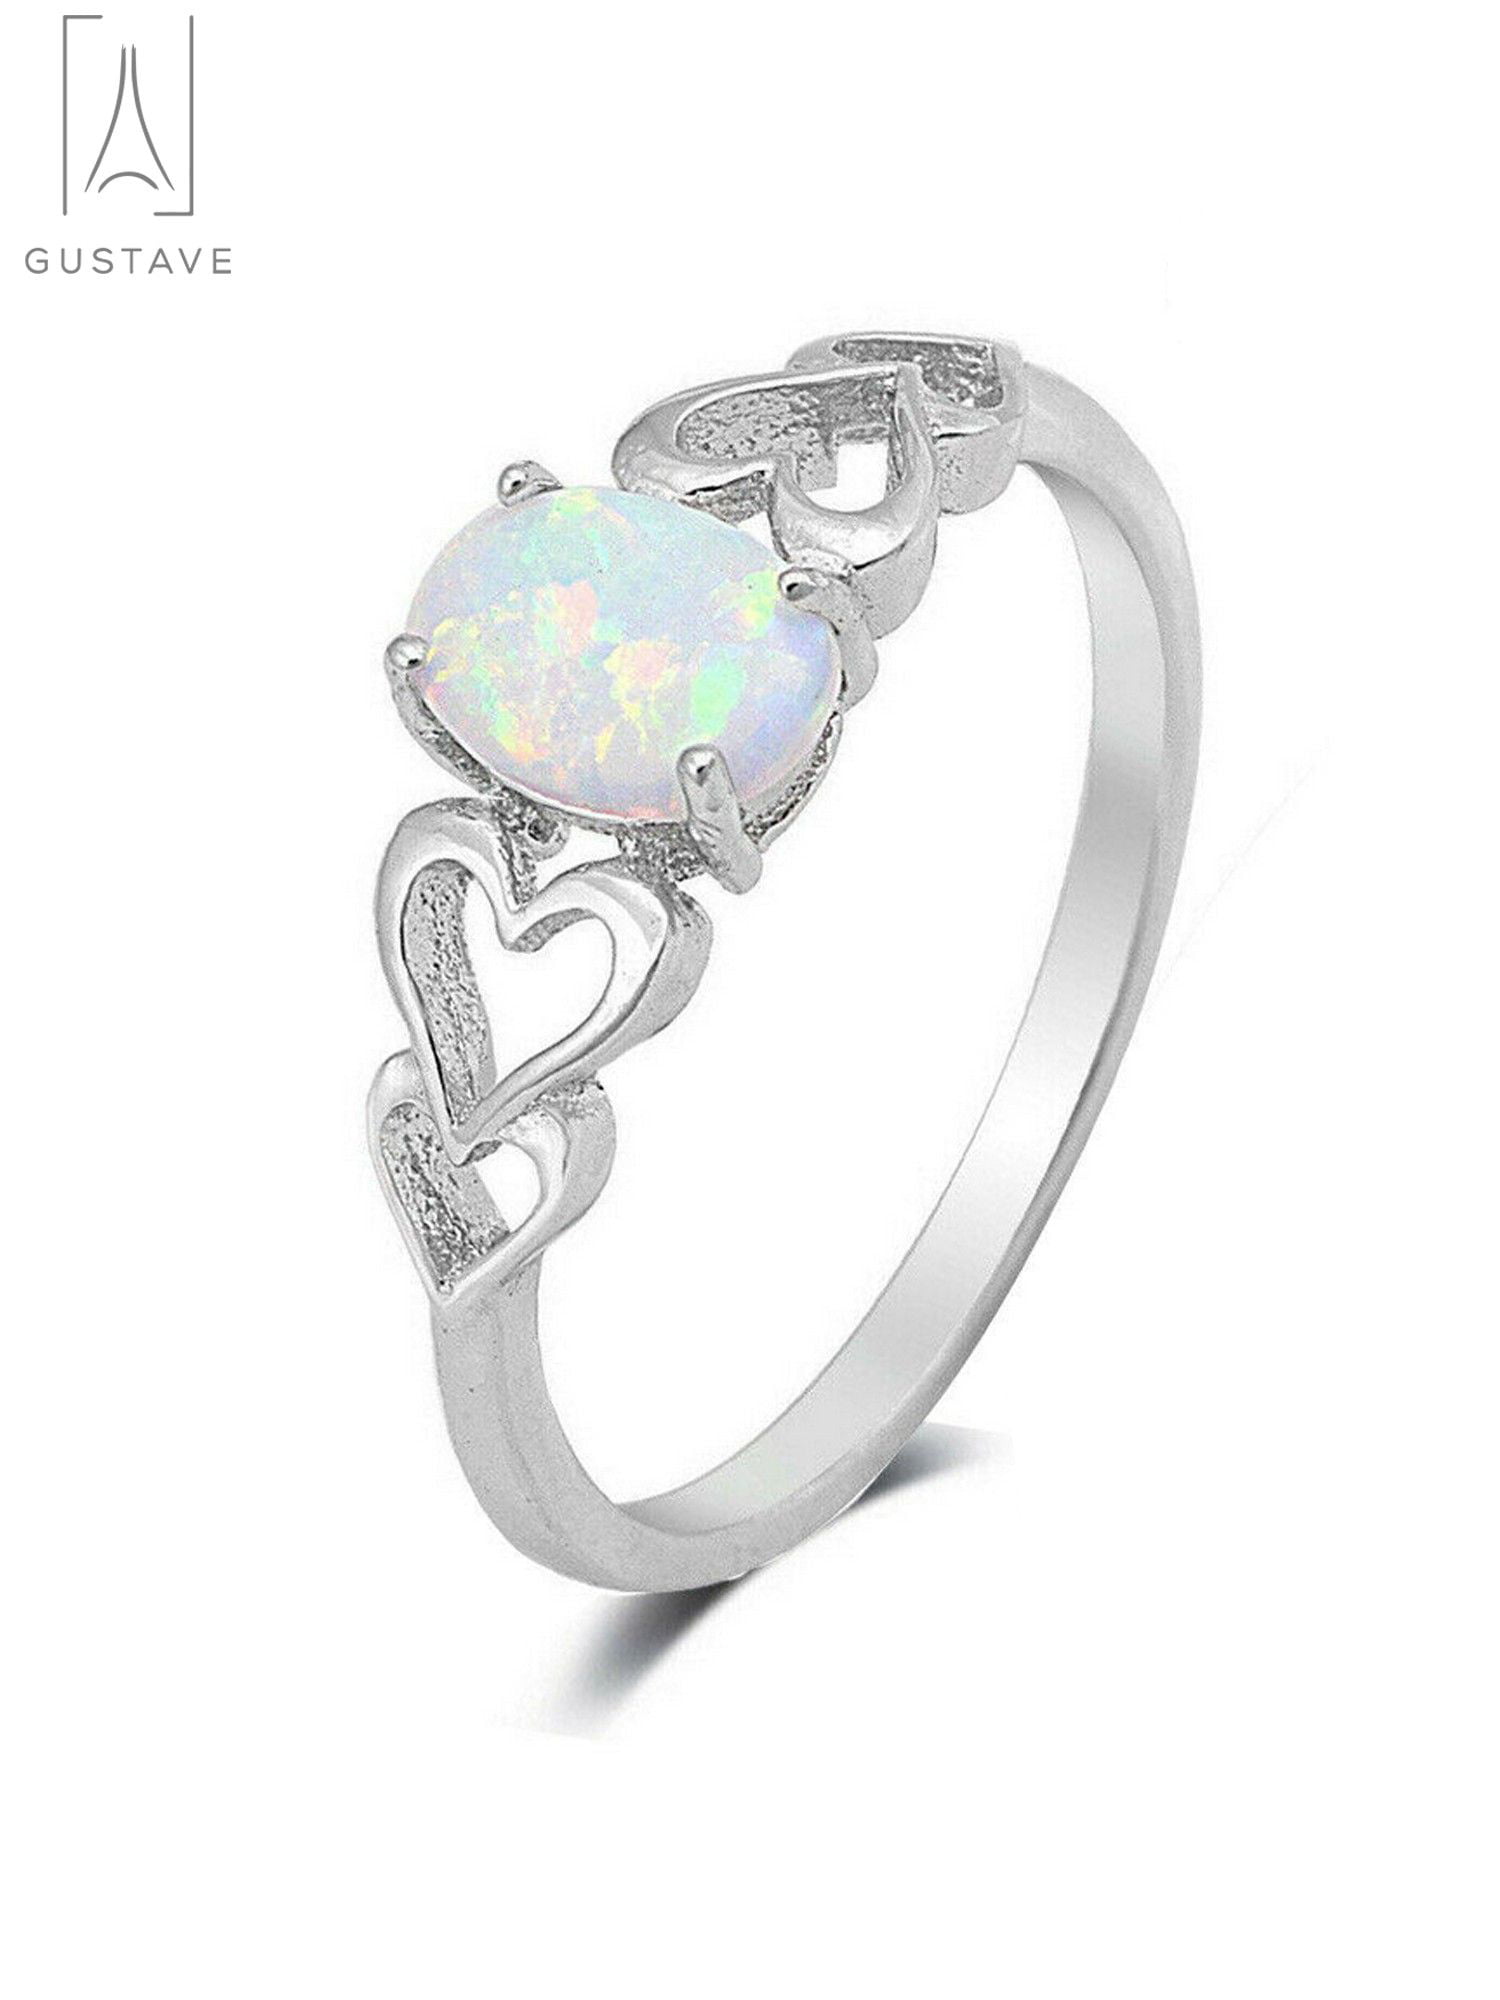 White Fire Opal Rings Vintage 925 Silver for Women Wedding Jewelry Gift Size6-10 